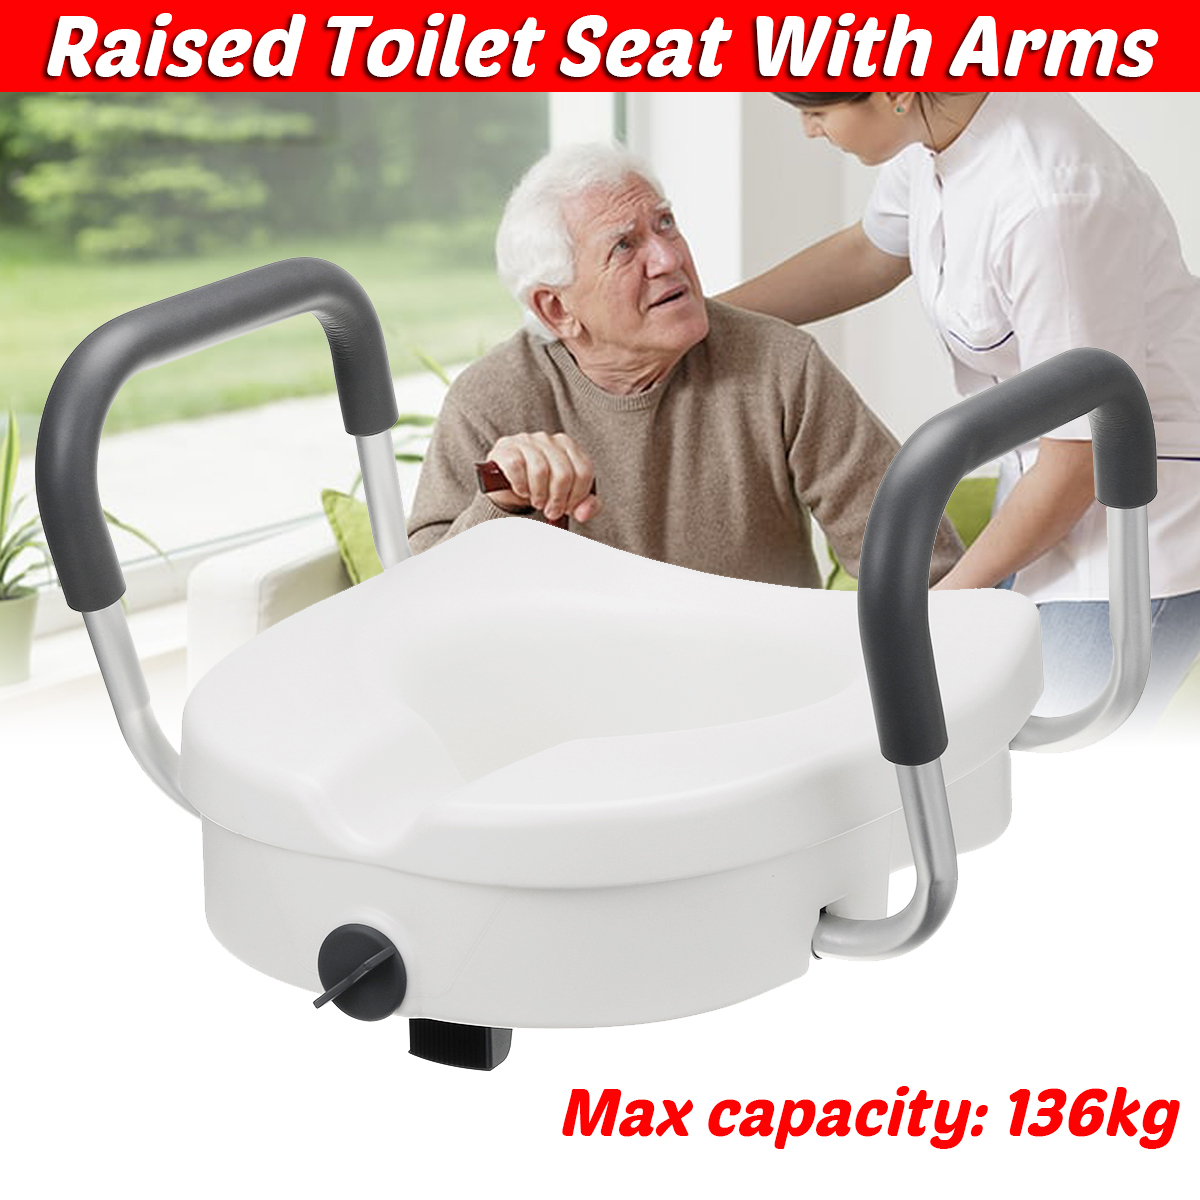 Removable Raised Toilet Seat With Arms Handles Padded Disability Aid Elderly Supports 1